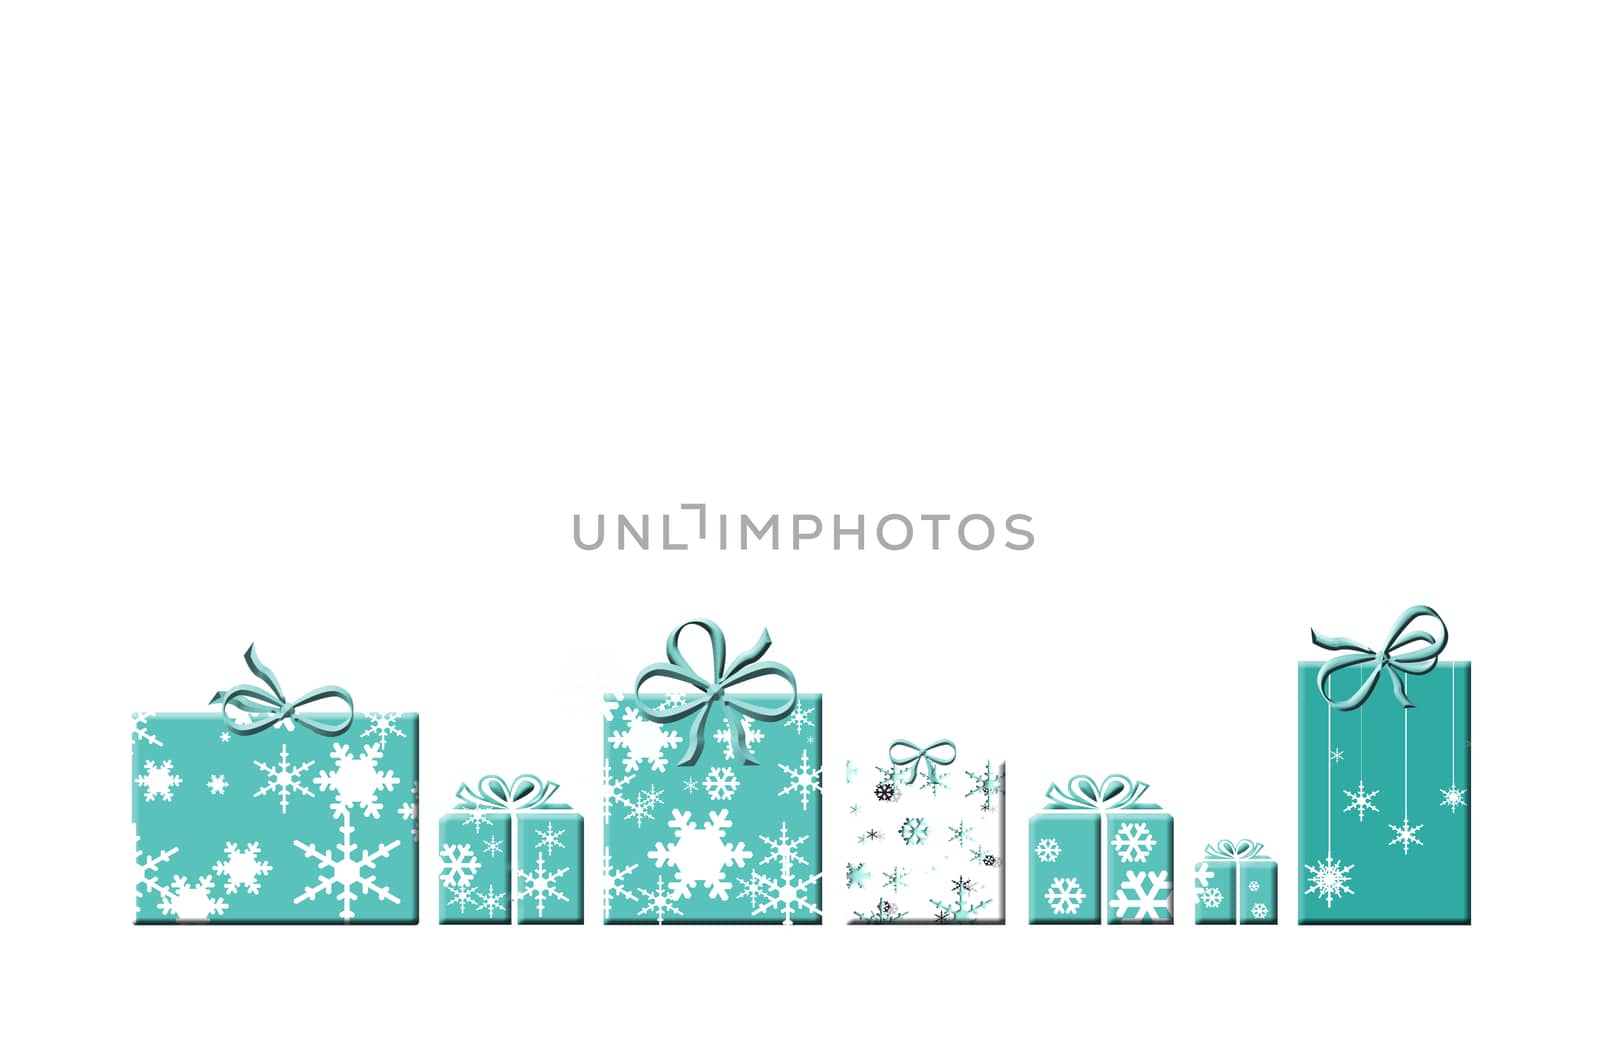 Luxury Christmas New Year greeting card. Tiffany blue words Merry Christmas and Happy New Year on white background. Abstract wrapped turquoise blue gift boxes, white snowflakes. 3D Illustration